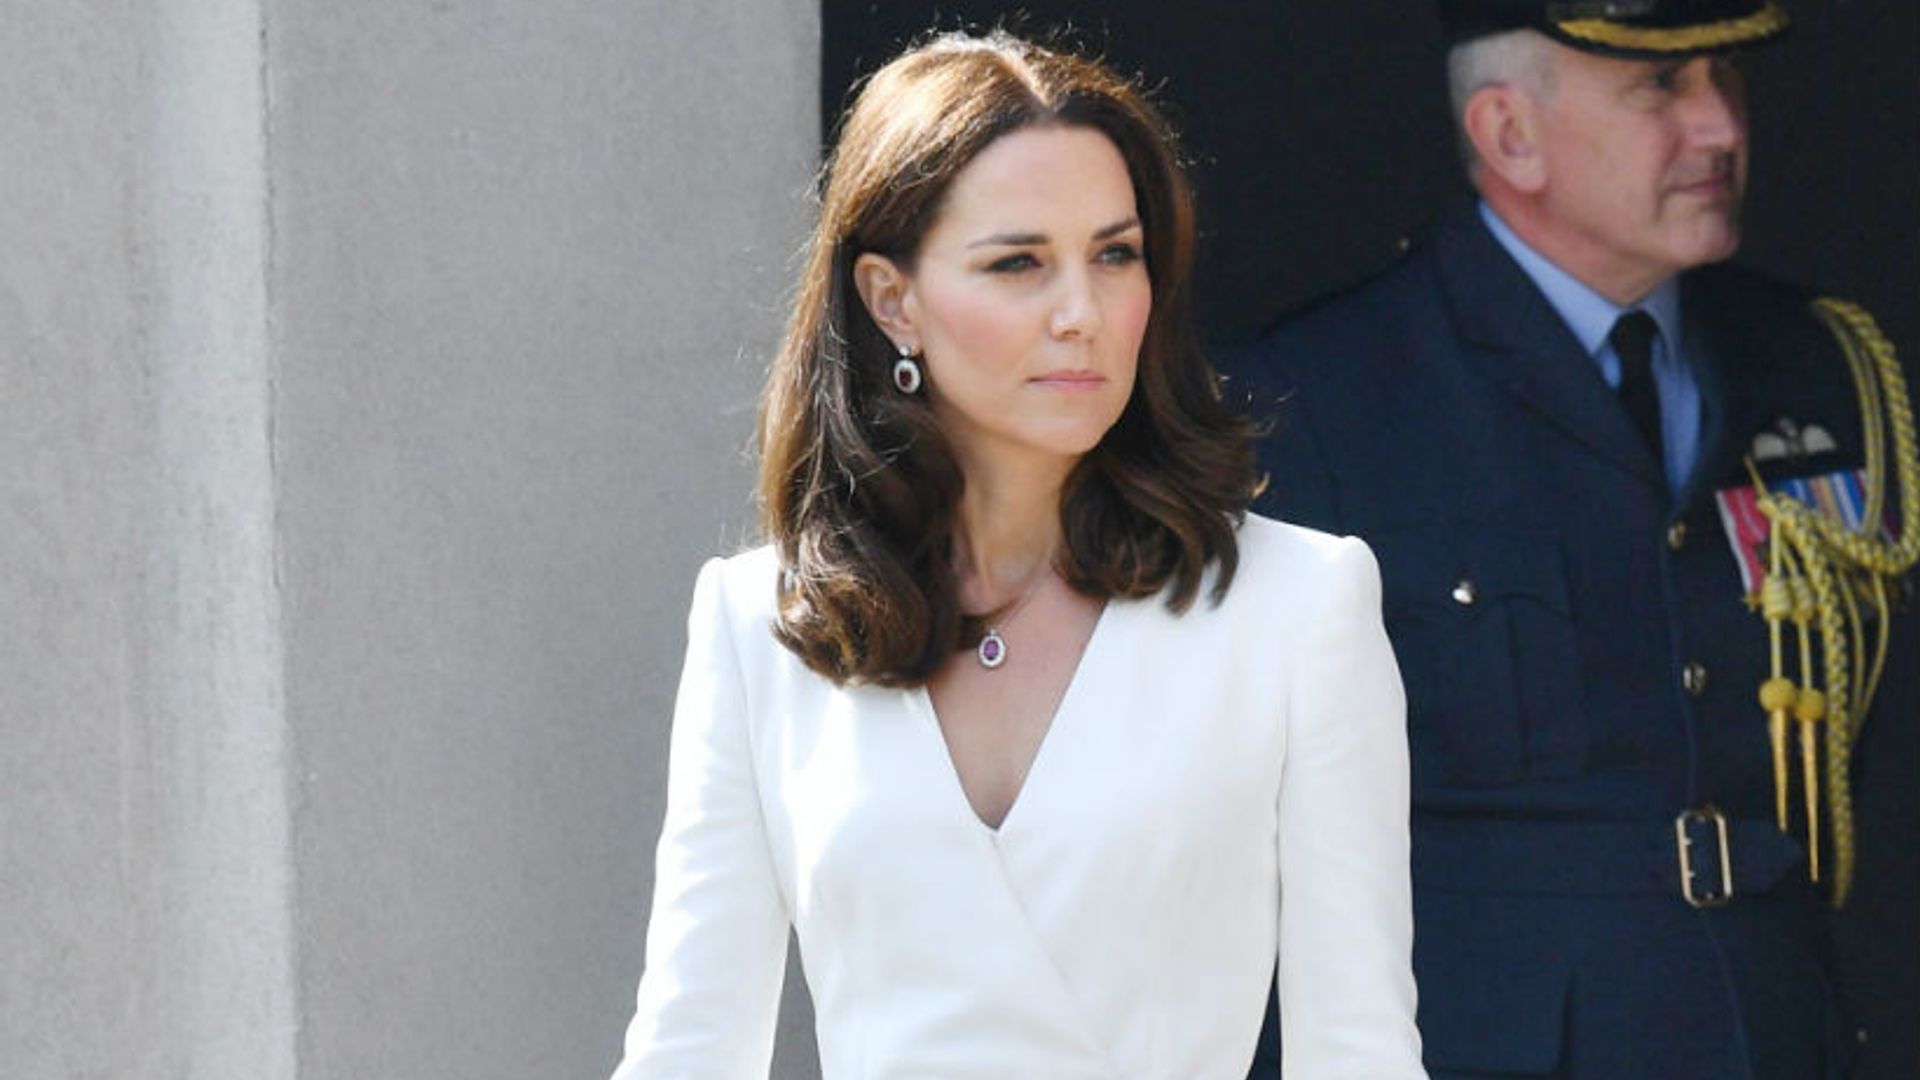 Modest Kate says she is not beautiful or perfect: 'It's just the make-up'